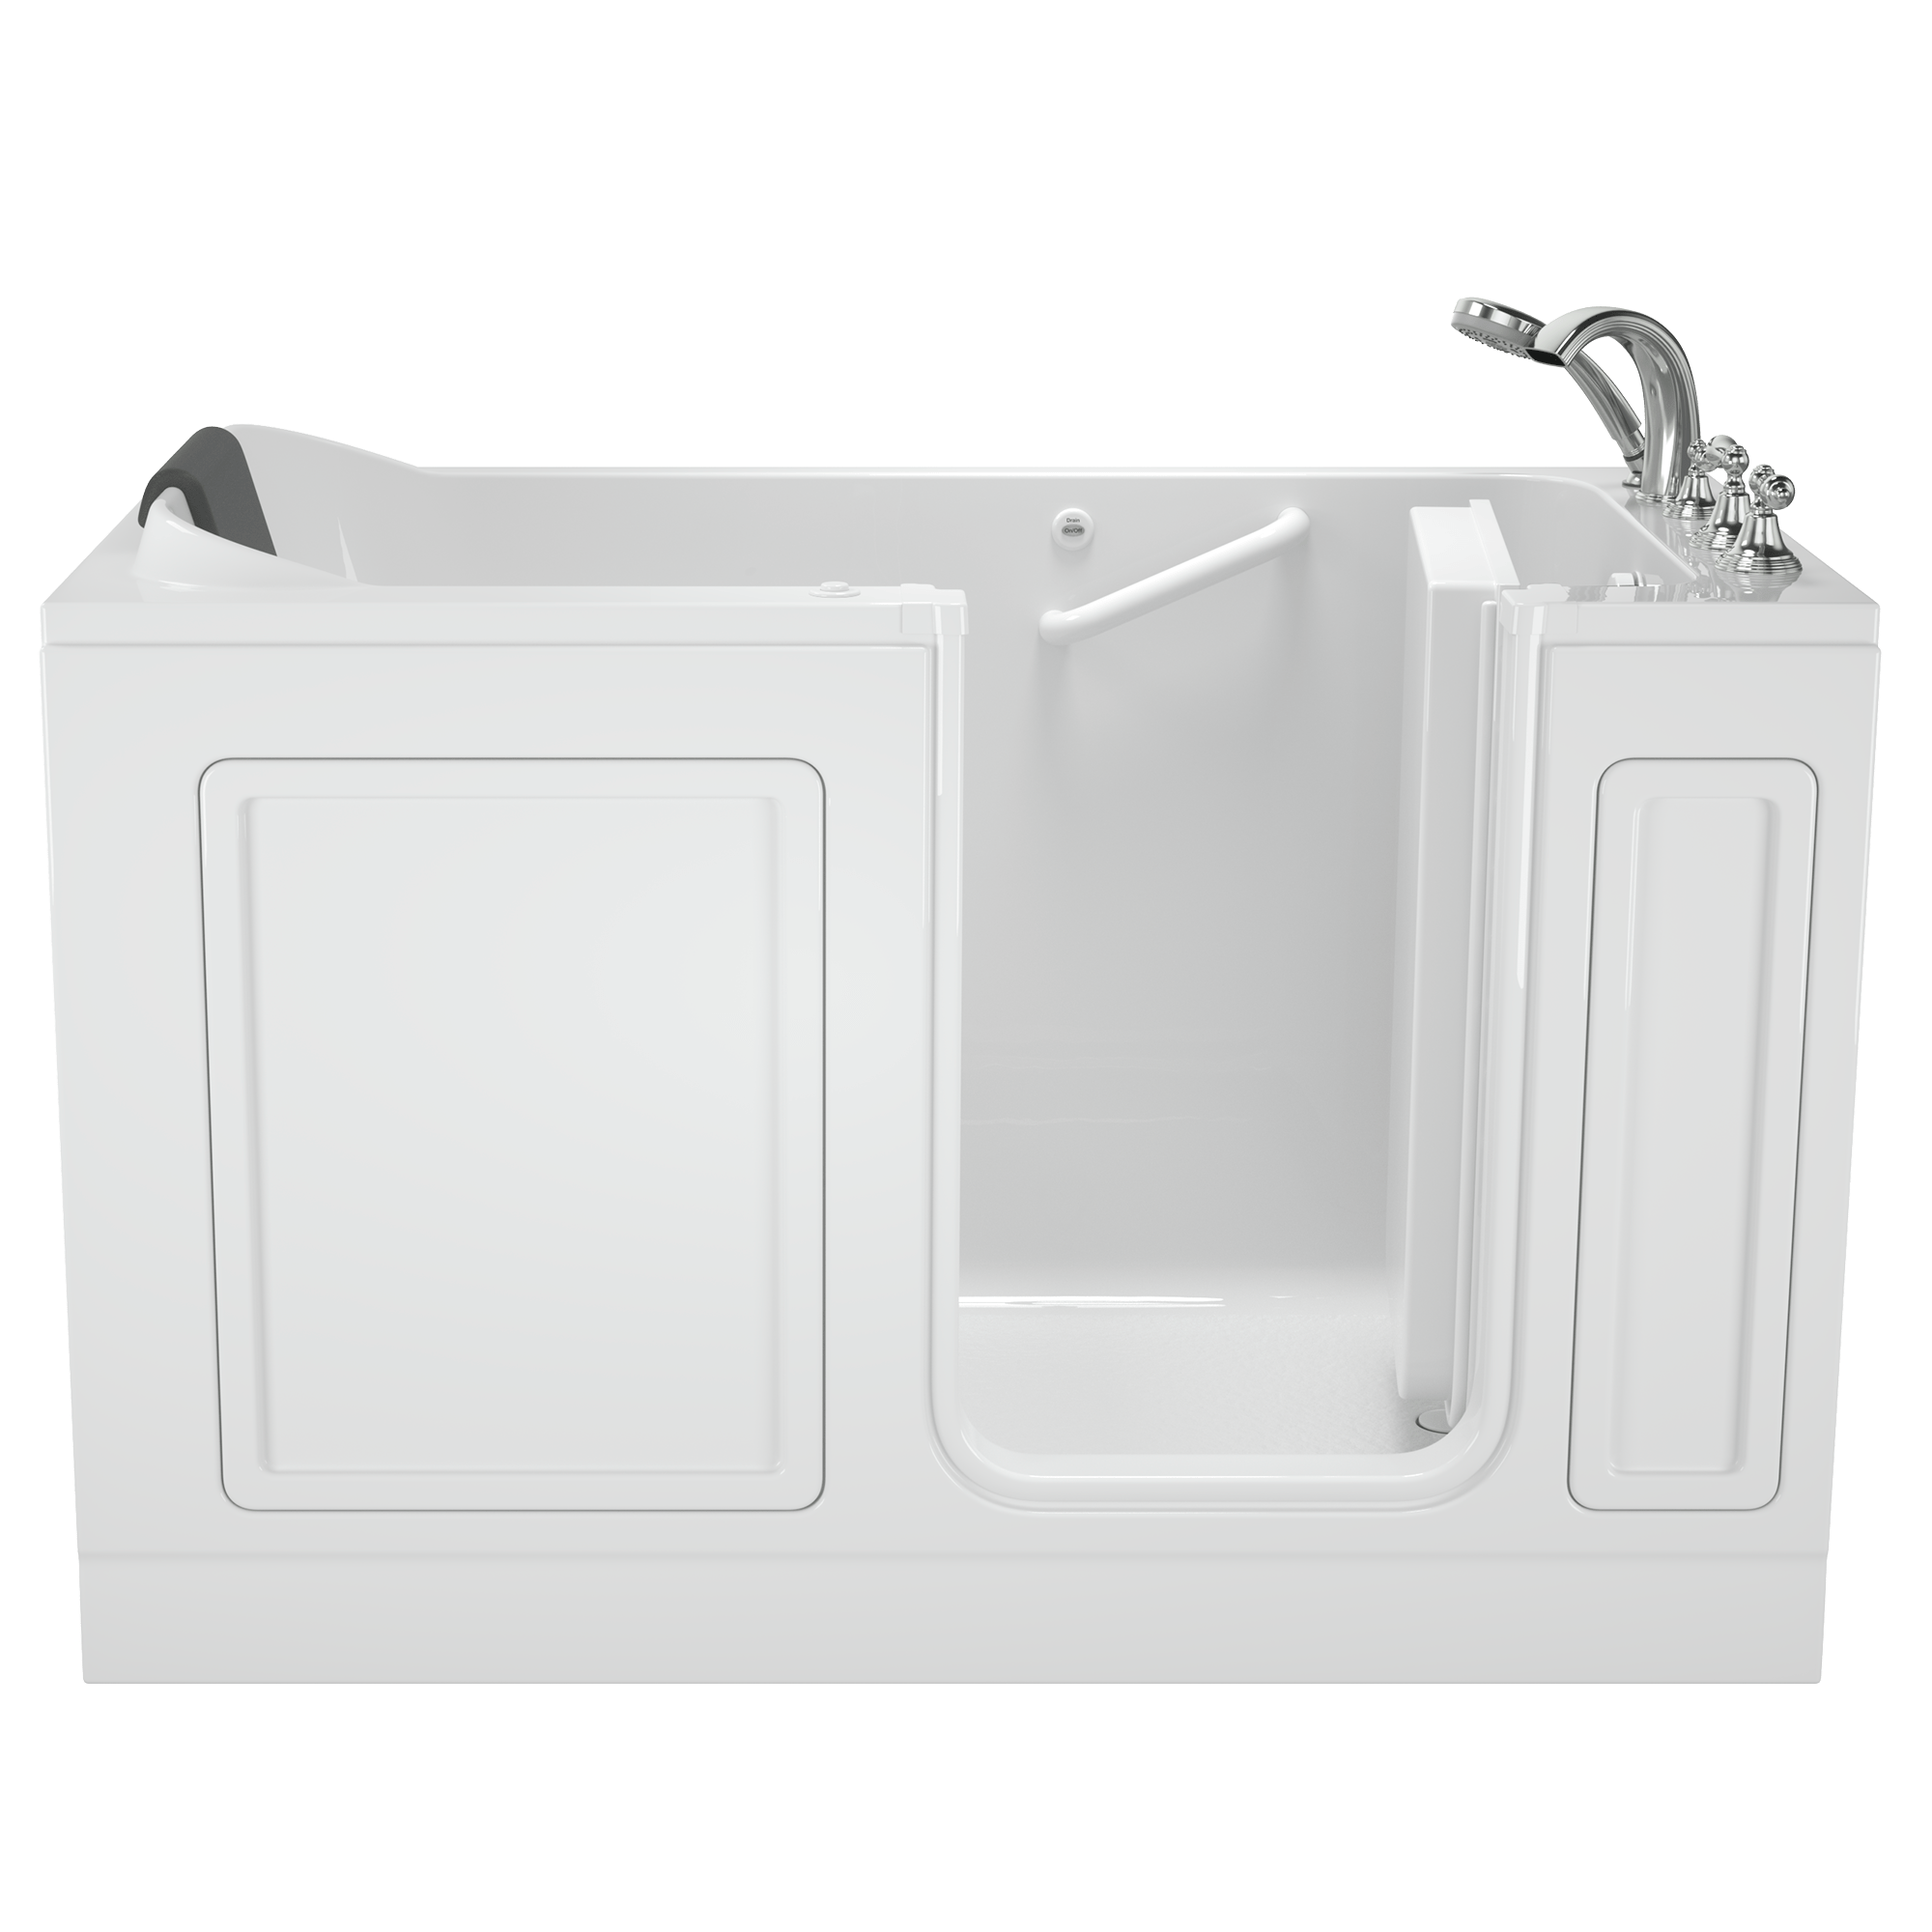 Acrylic Luxury Series 32 x 60 -Inch Walk-in Tub With Air Spa System - Right-Hand Drain With Faucet